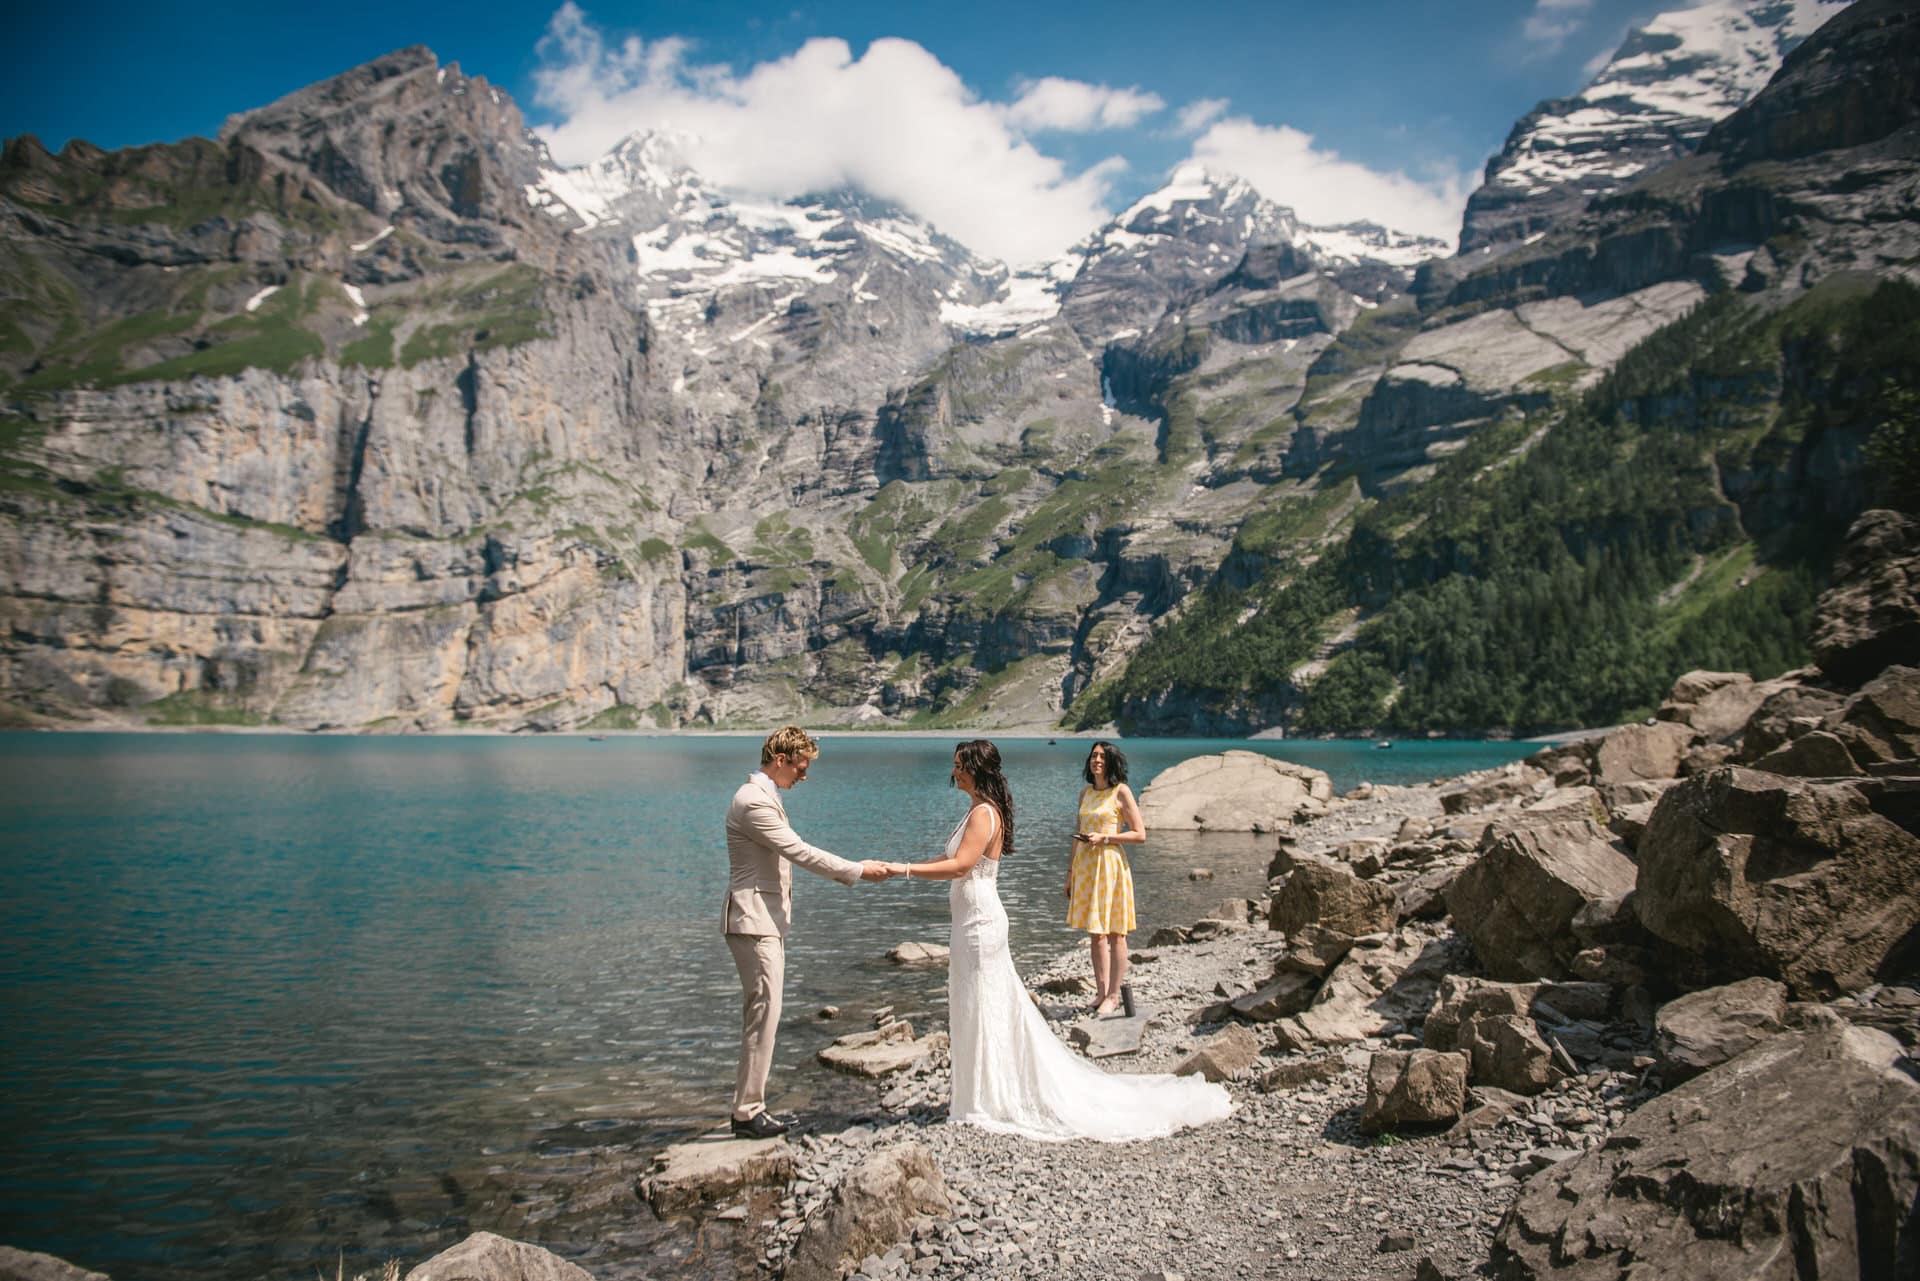 Vows exchanged in nature's cathedral - hiking elopement in Switzerland.